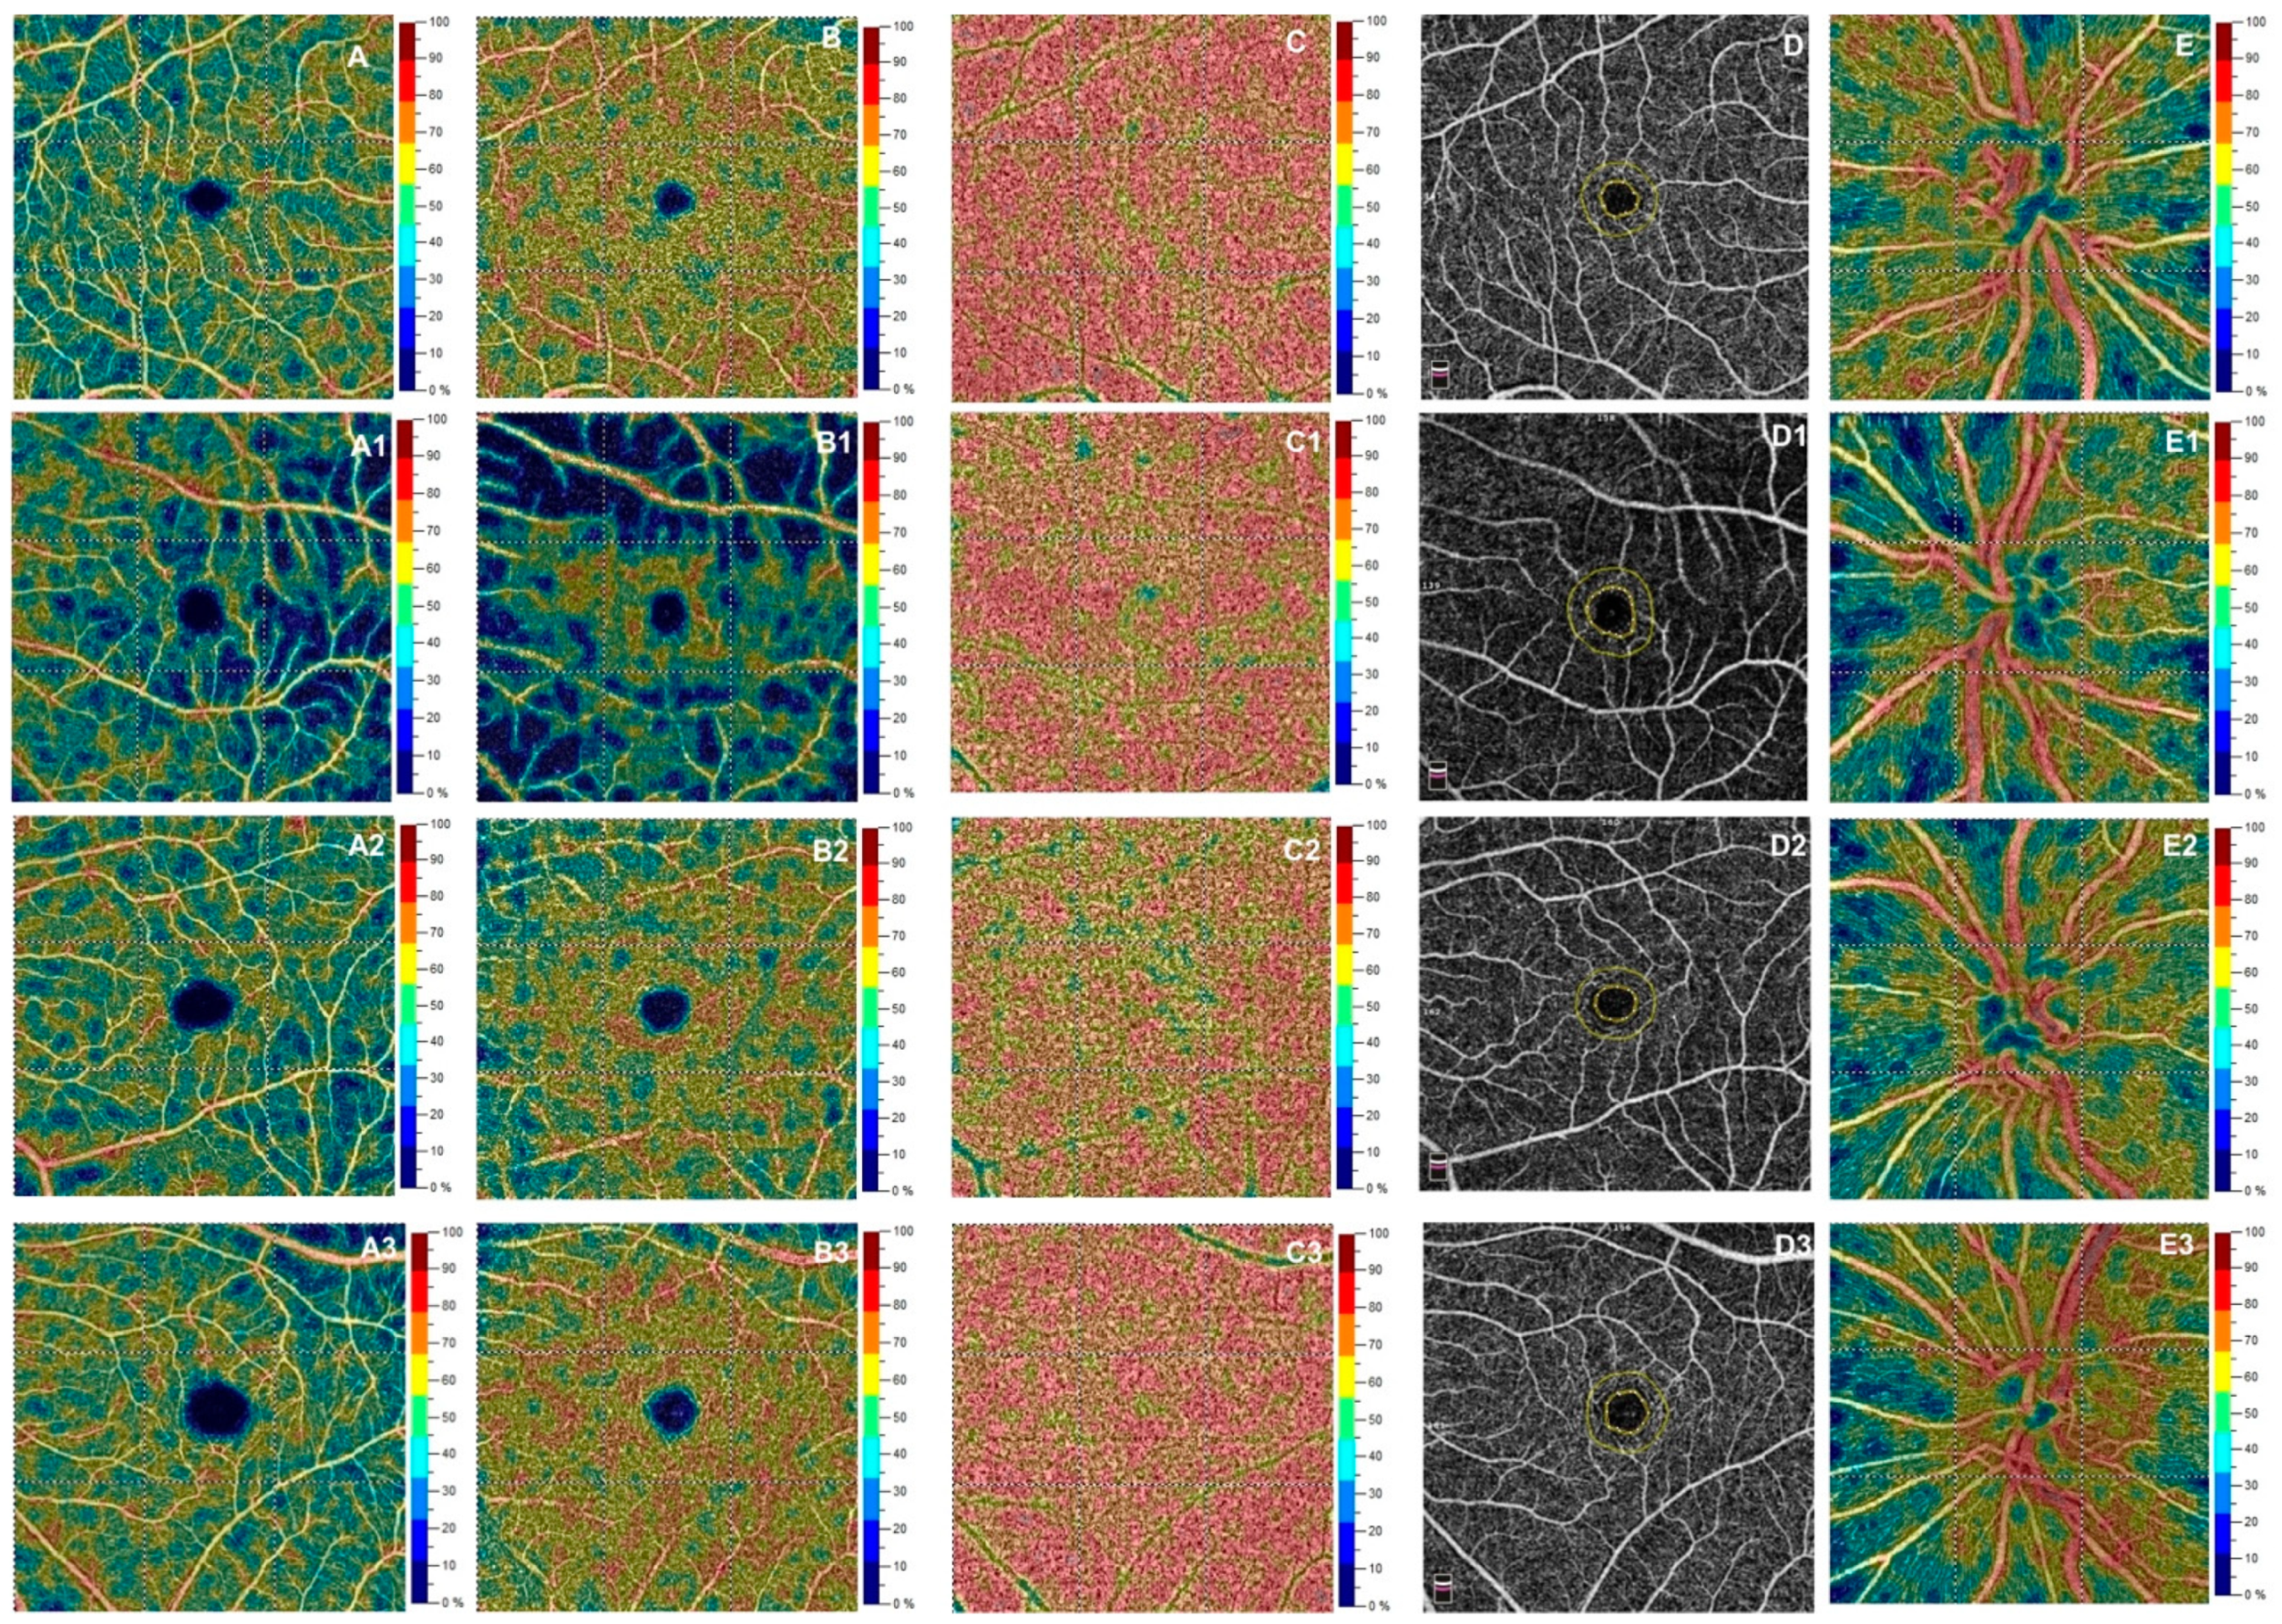 Biology | Free Full-Text | Retinal and Choriocapillaris Vascular Changes in  Patients Affected by Different Clinical Phenotypes of β-Thalassemia: An  Optical Coherence Tomography Angiography Study